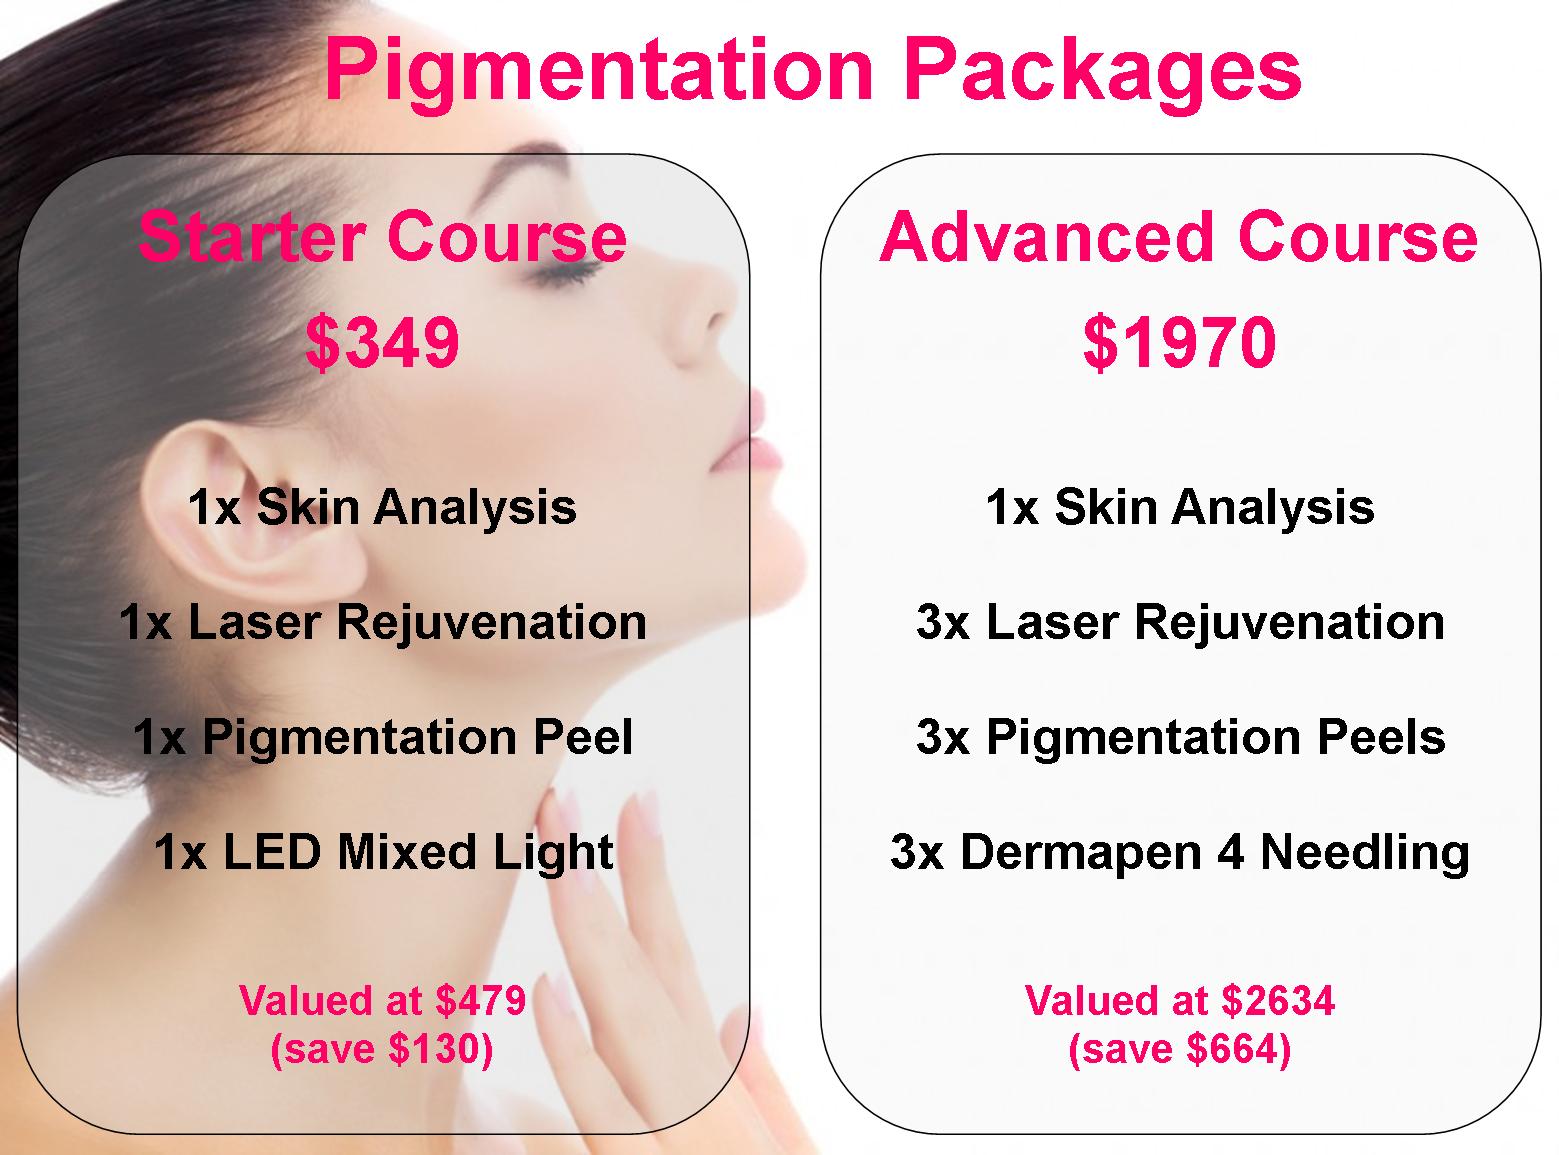 Pigmentation Packages